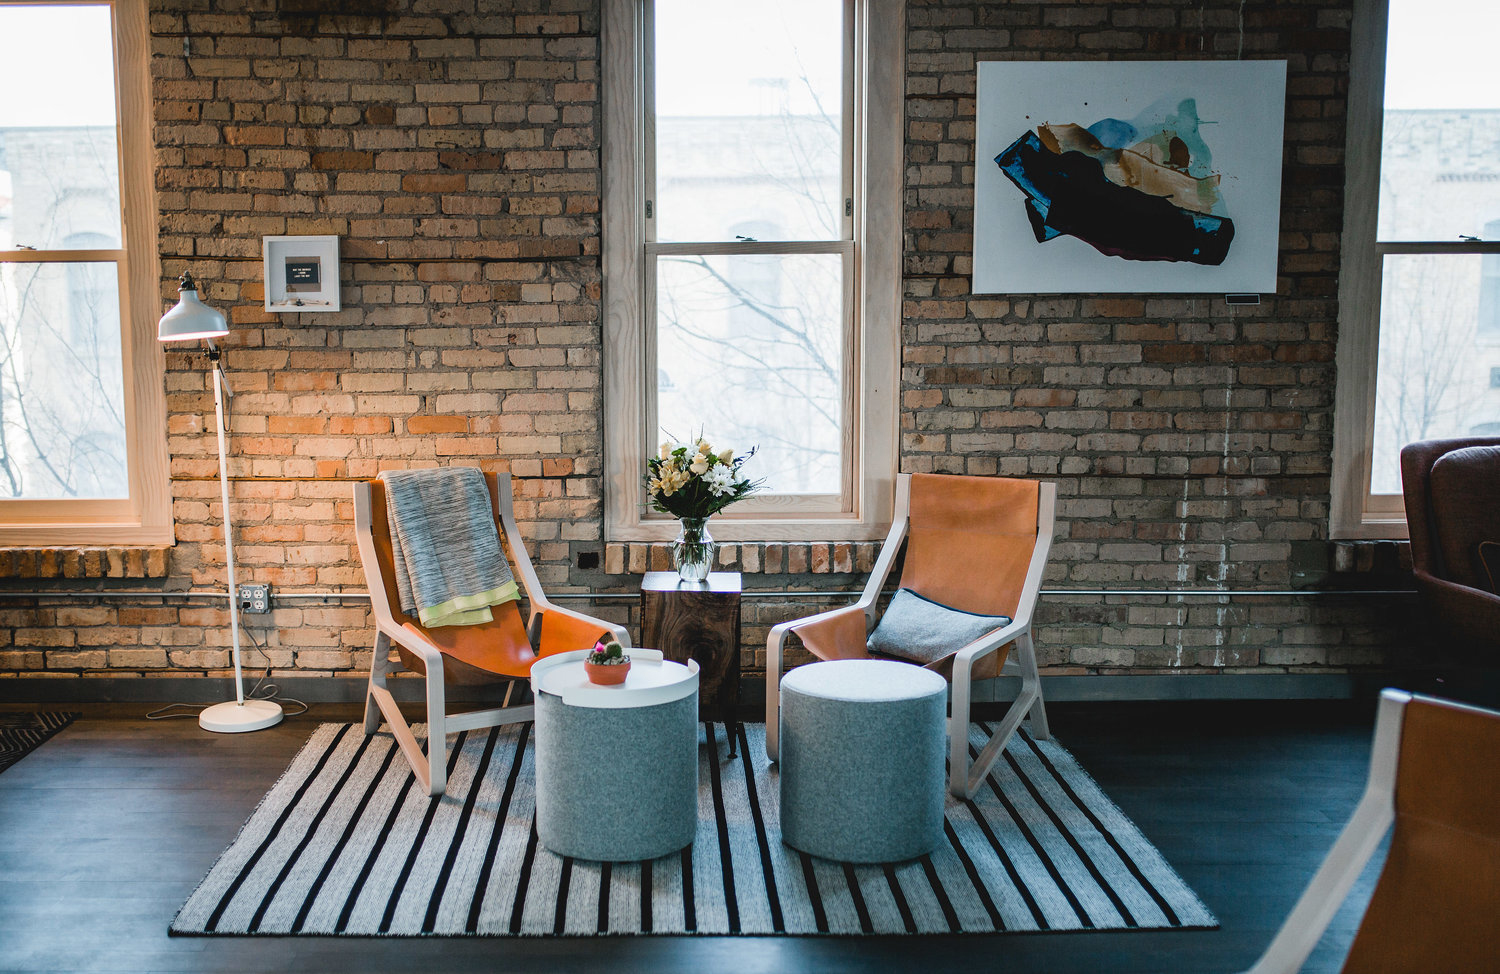 The Coven -- women and non-binary folks' coworking space in Minneapolis, USA